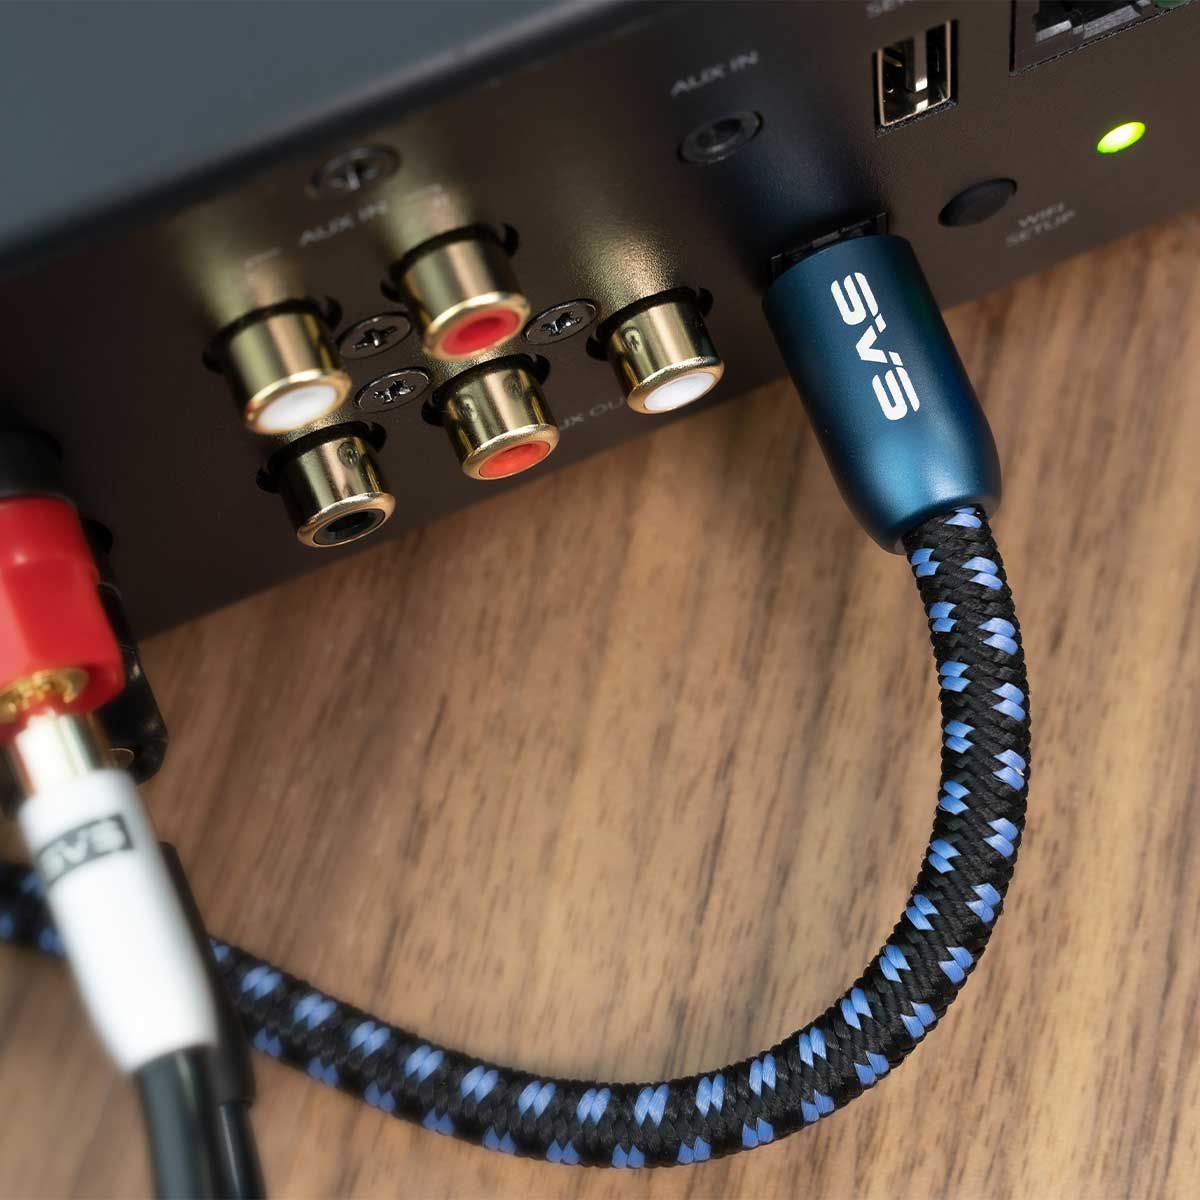 SVS SoundPath Digital Optical Cable - plugged into amplifier